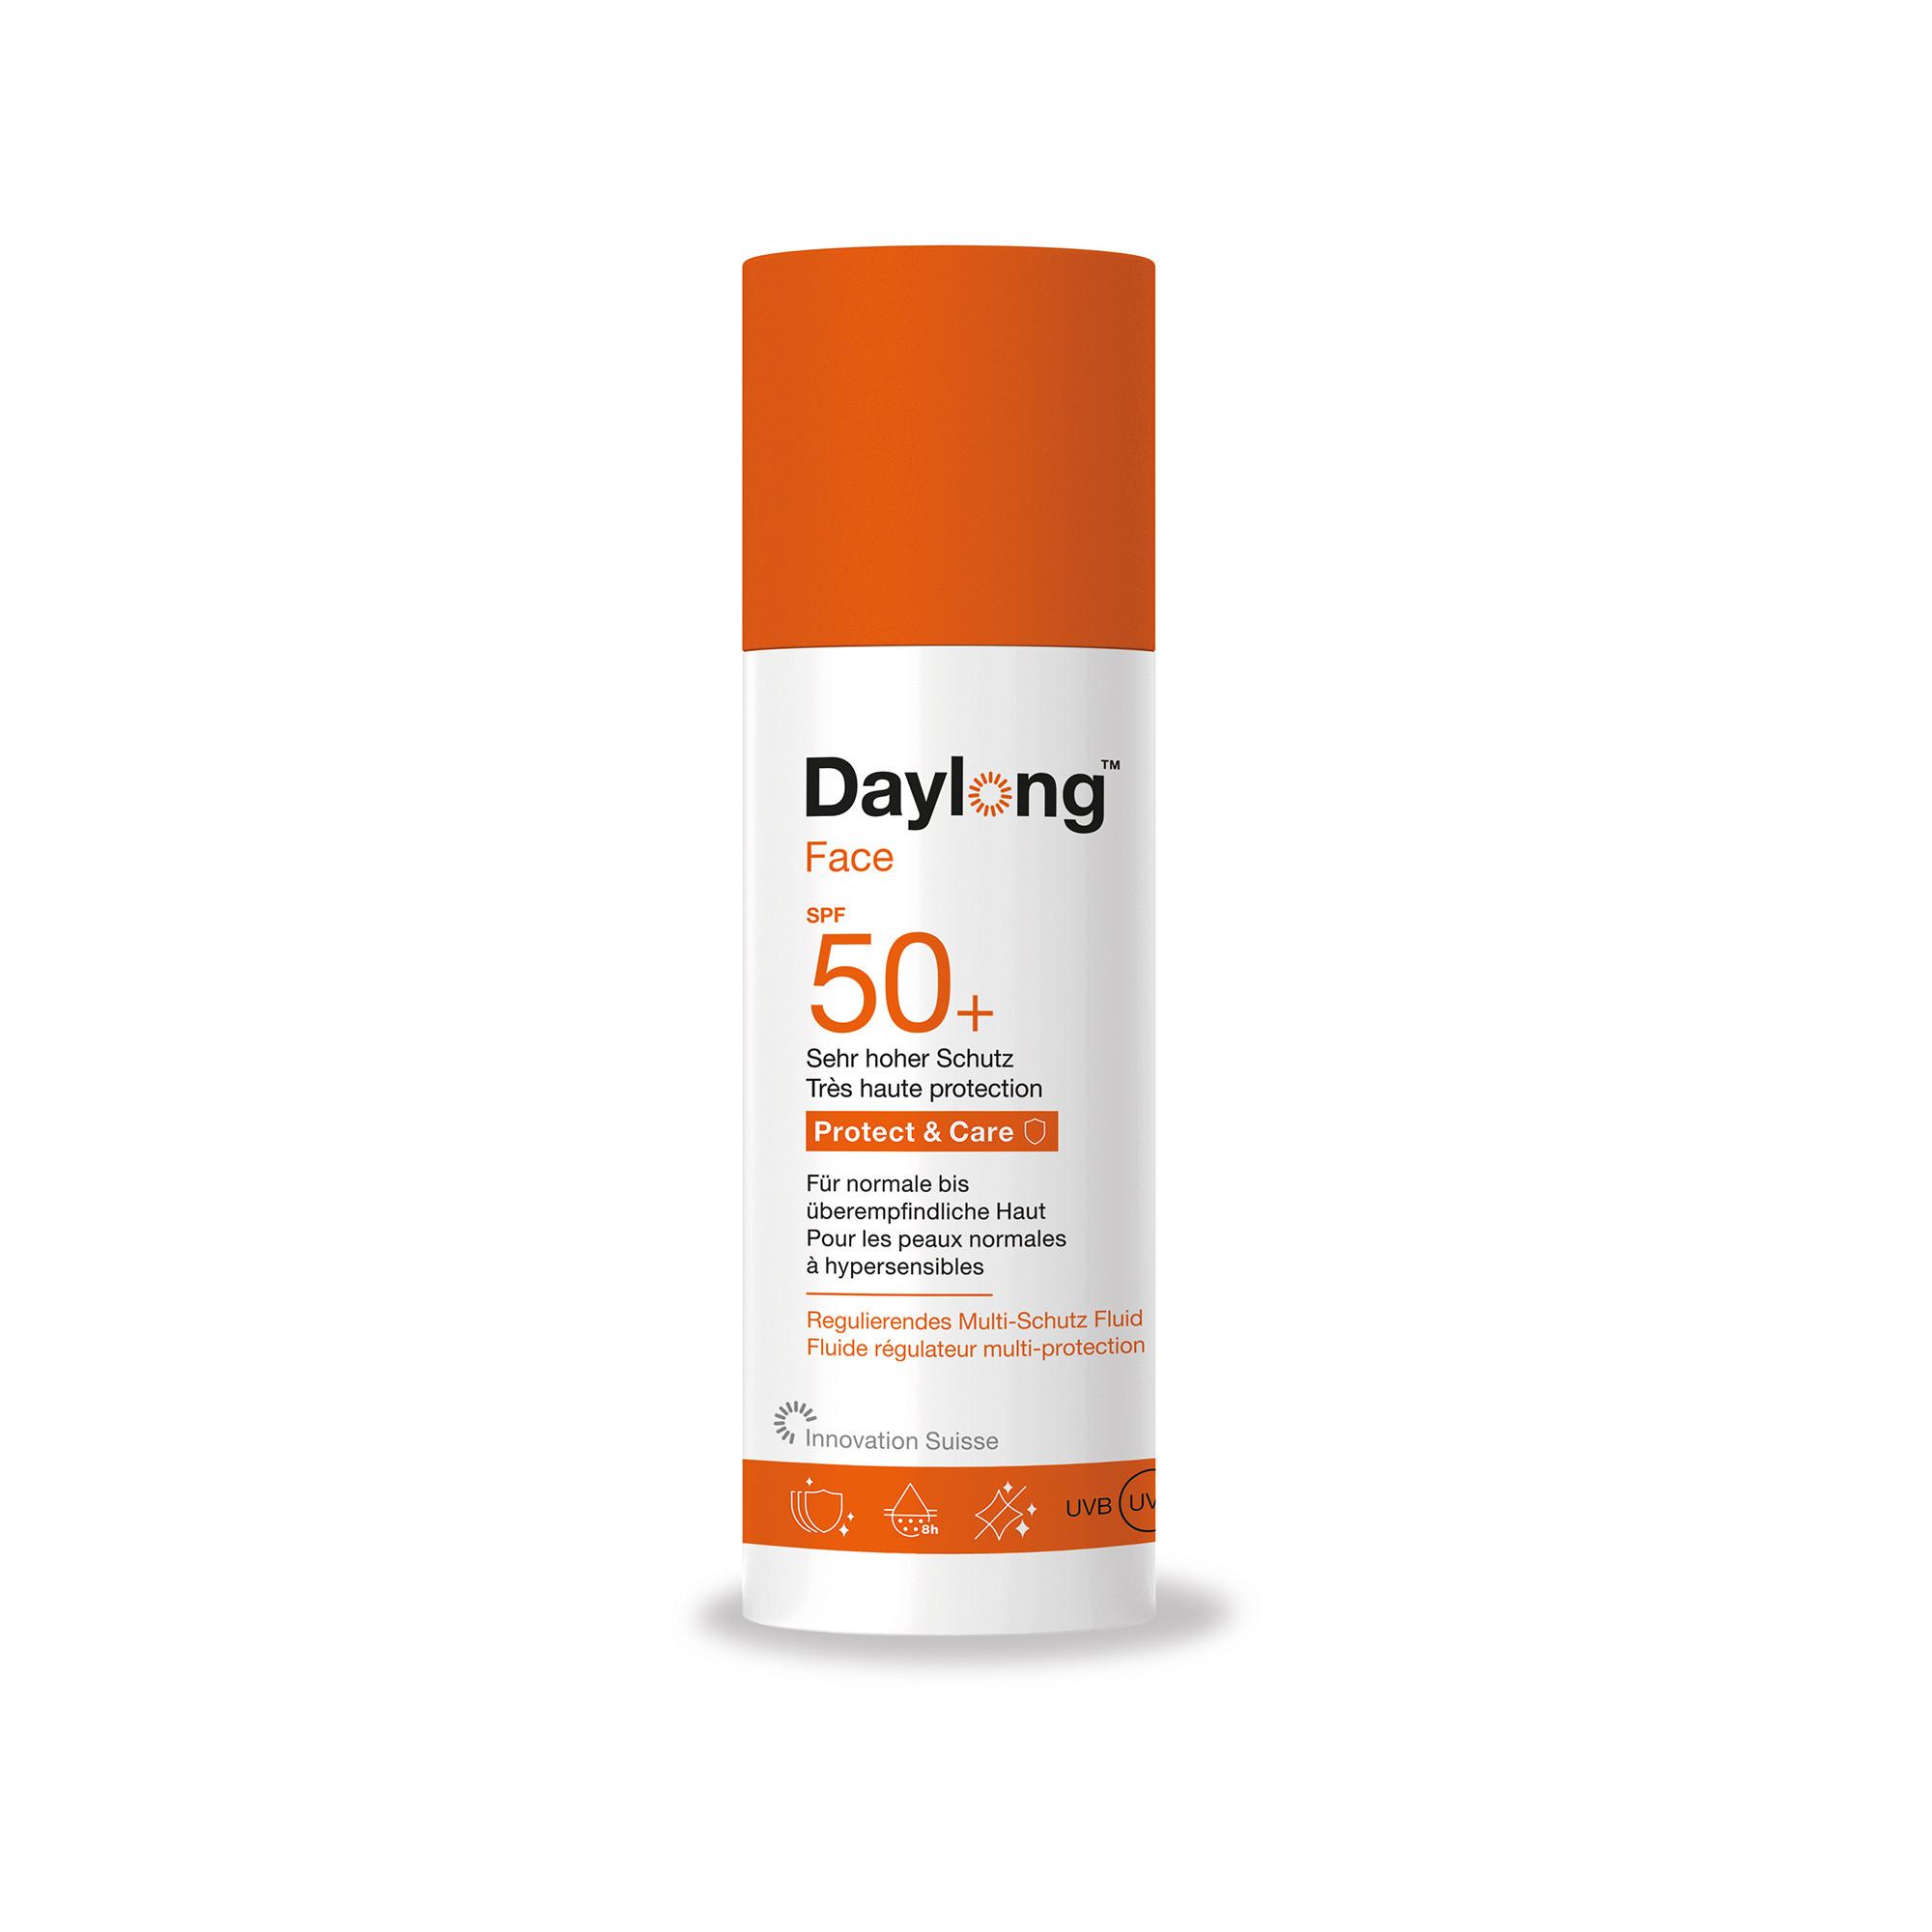 Image of Daylong Face Protect & Care Regulierendes Multi-Schutz Fluid SPF 50+ - 50ml